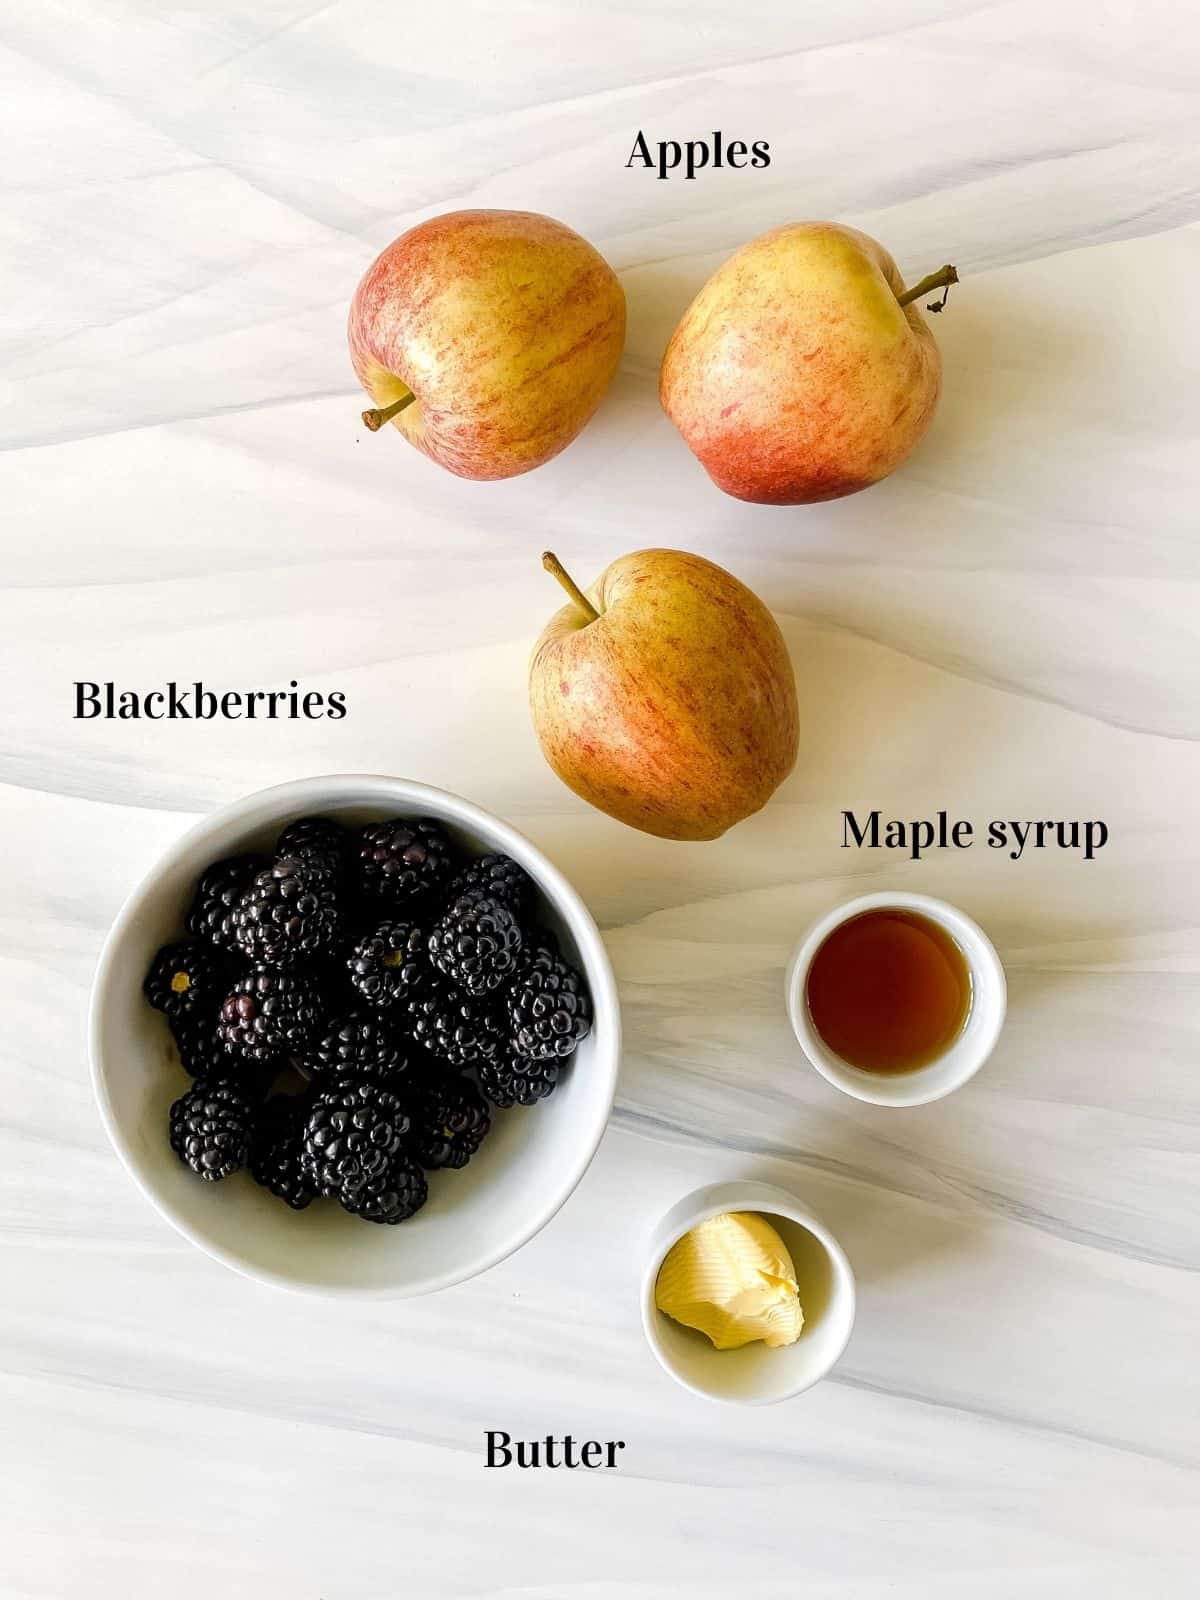 three apples and bowls of blackberries, maple syrup and butter.